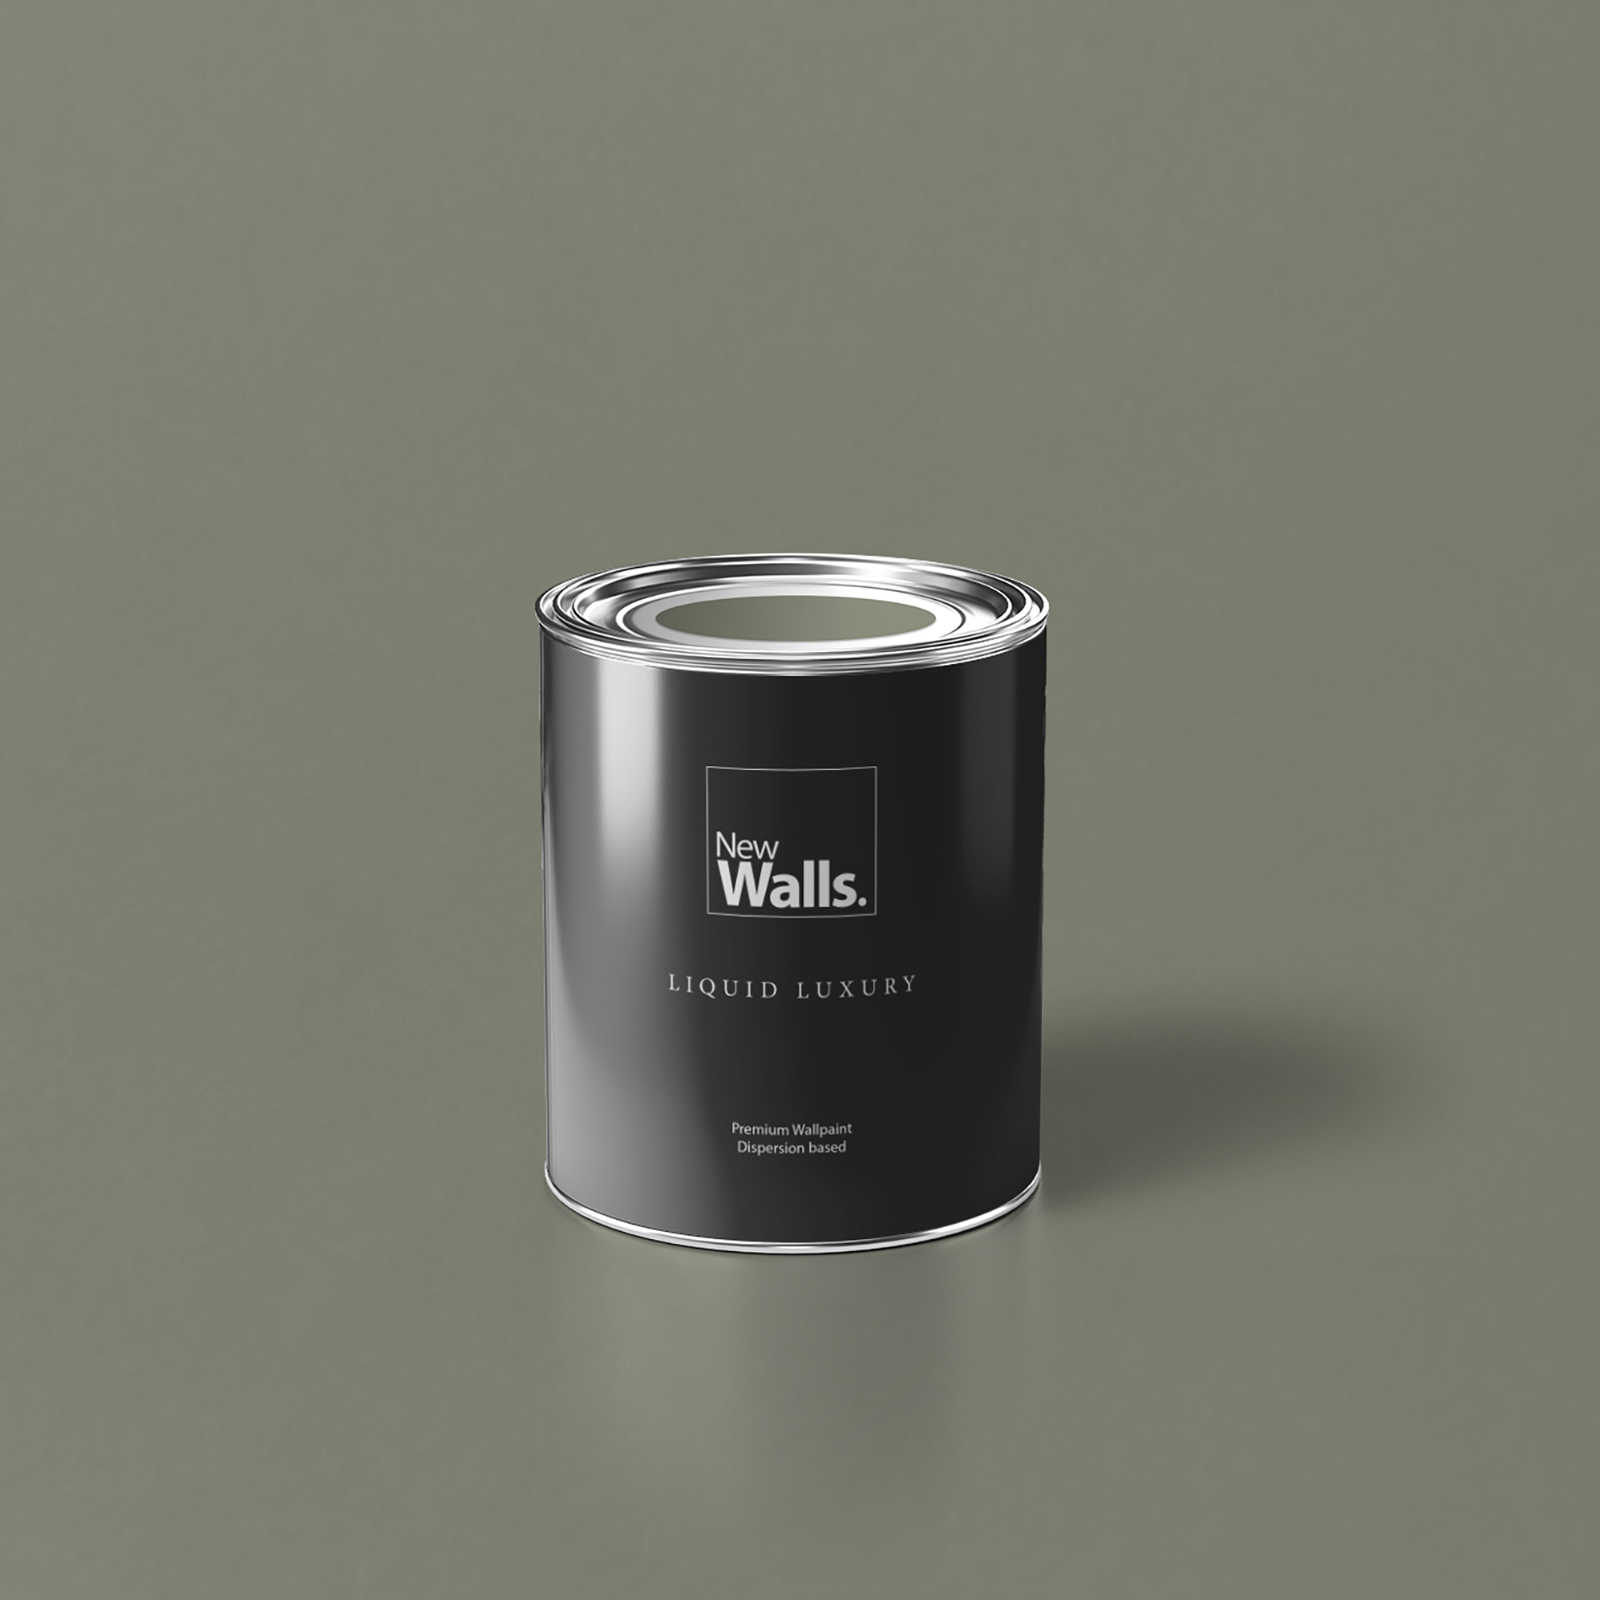 Premium Wall Paint Persuasive Olive Green »Talented calm taupe« NW706 – 1 litre
